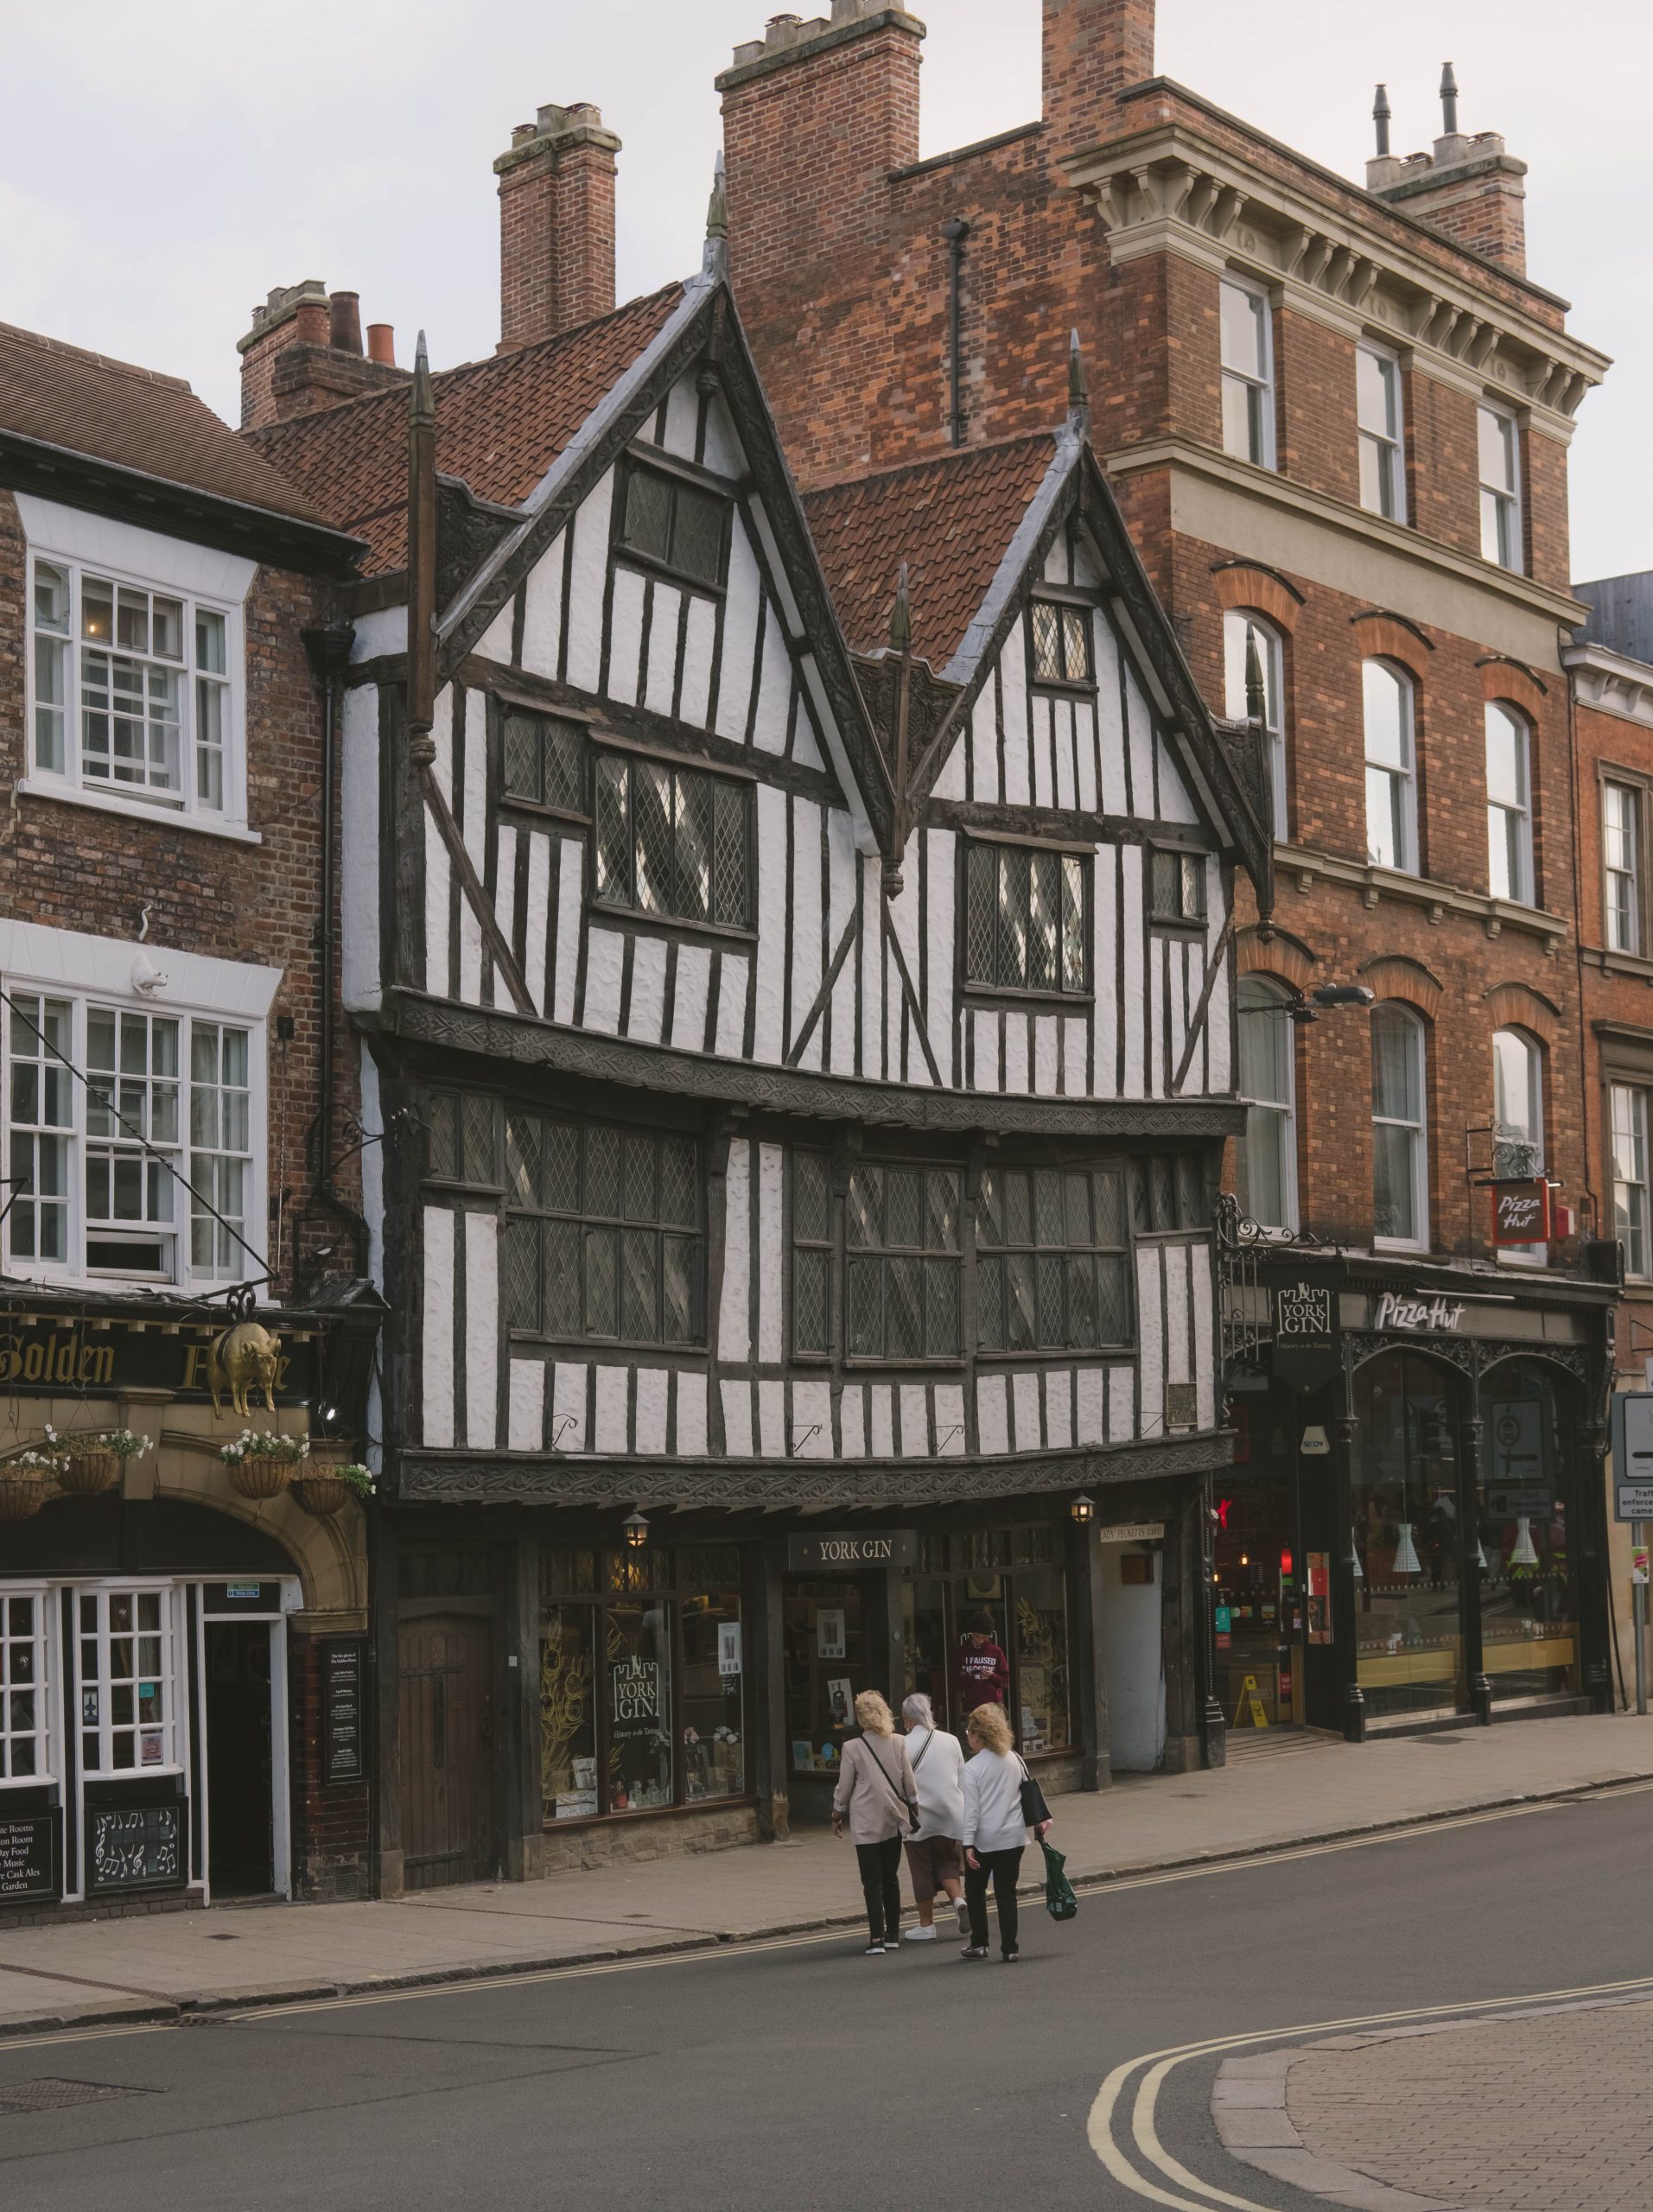 A beautiful traditional building used as a shop in York England